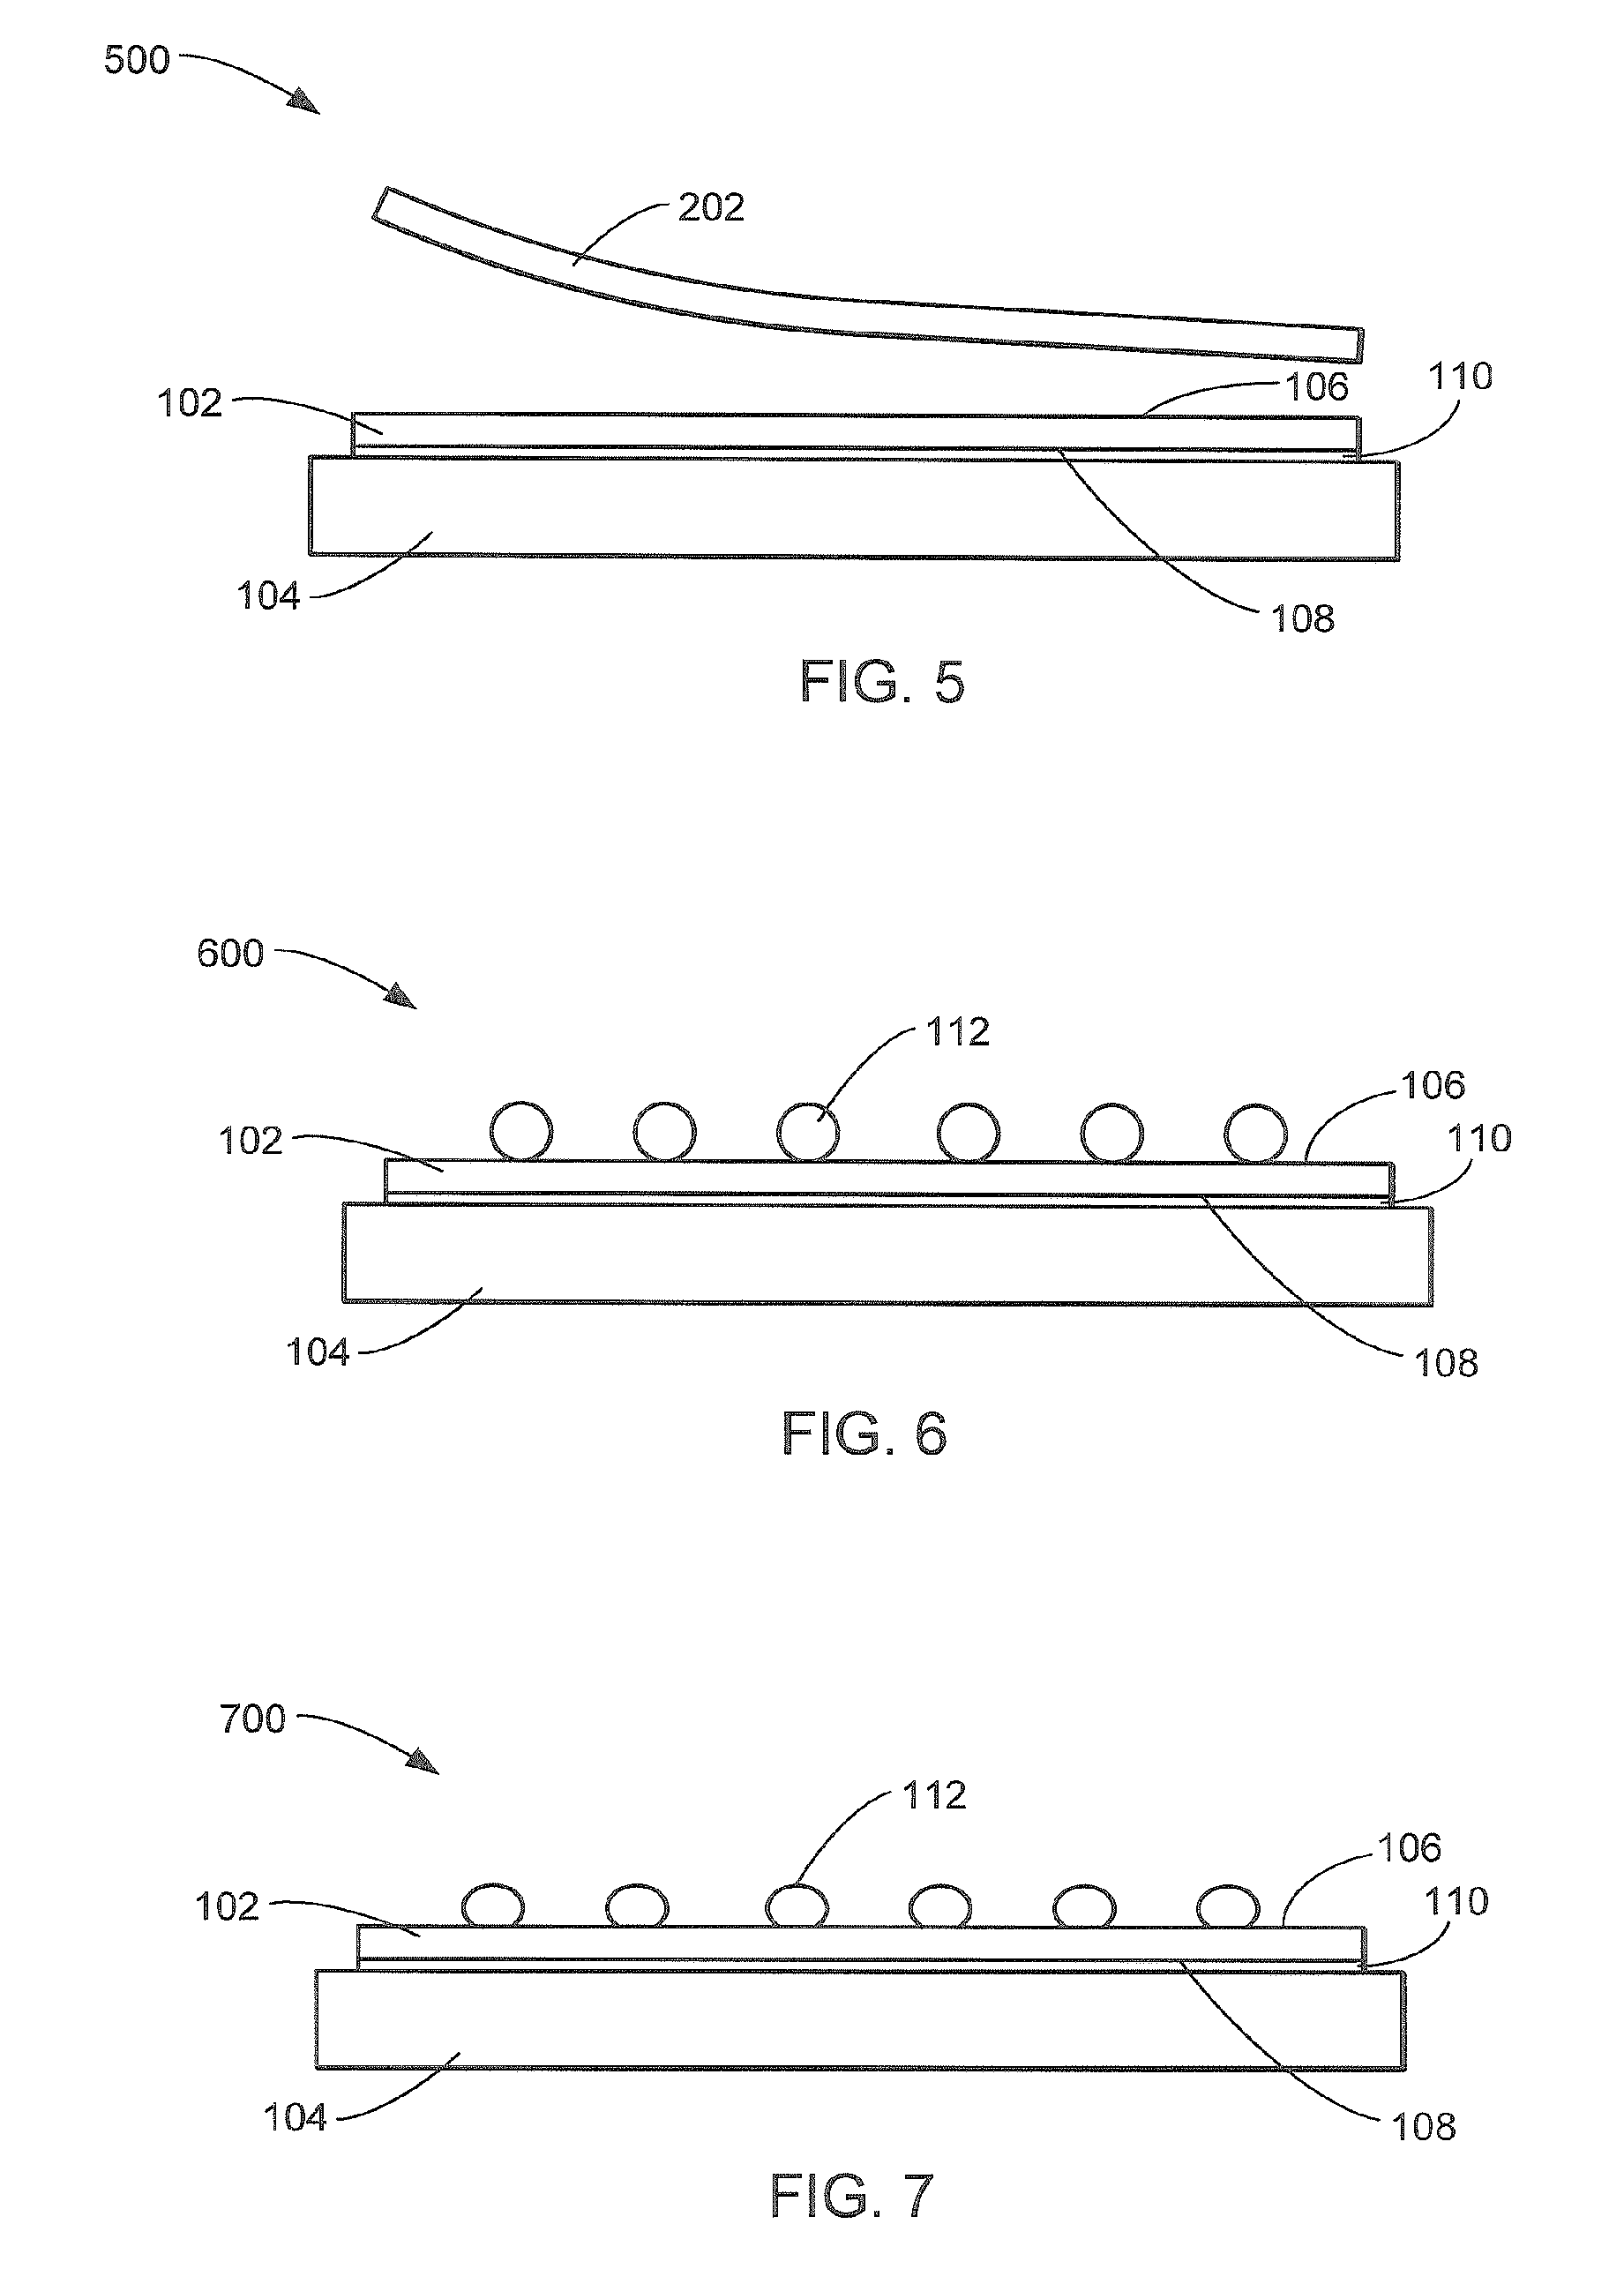 Ultra-thin wafer system